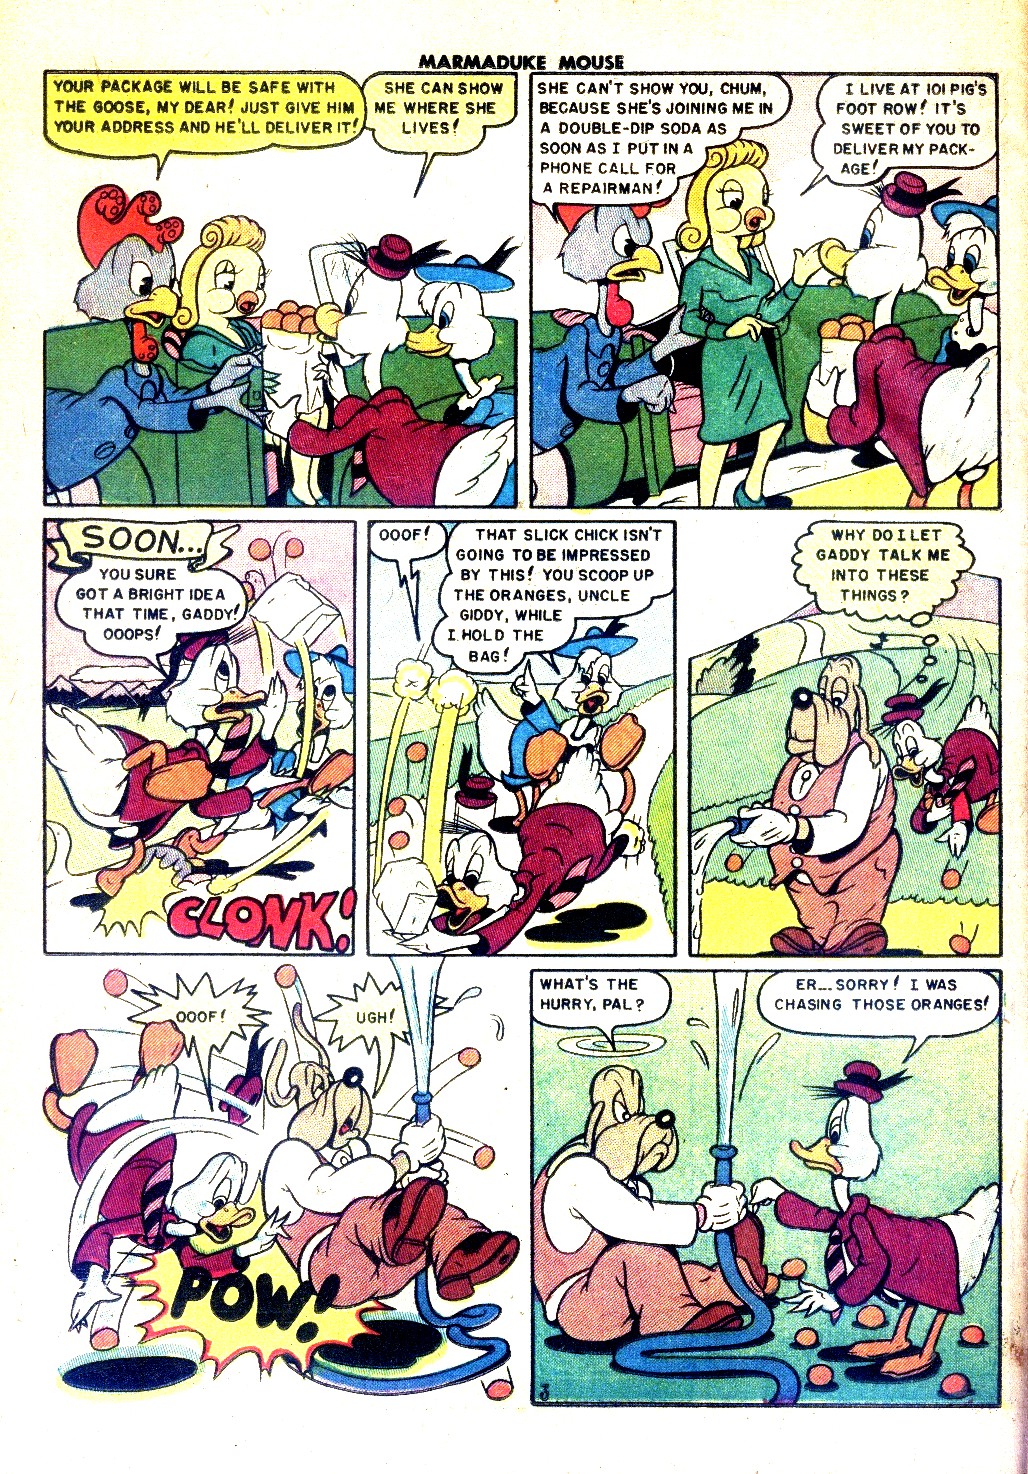 Read online Marmaduke Mouse comic -  Issue #53 - 12